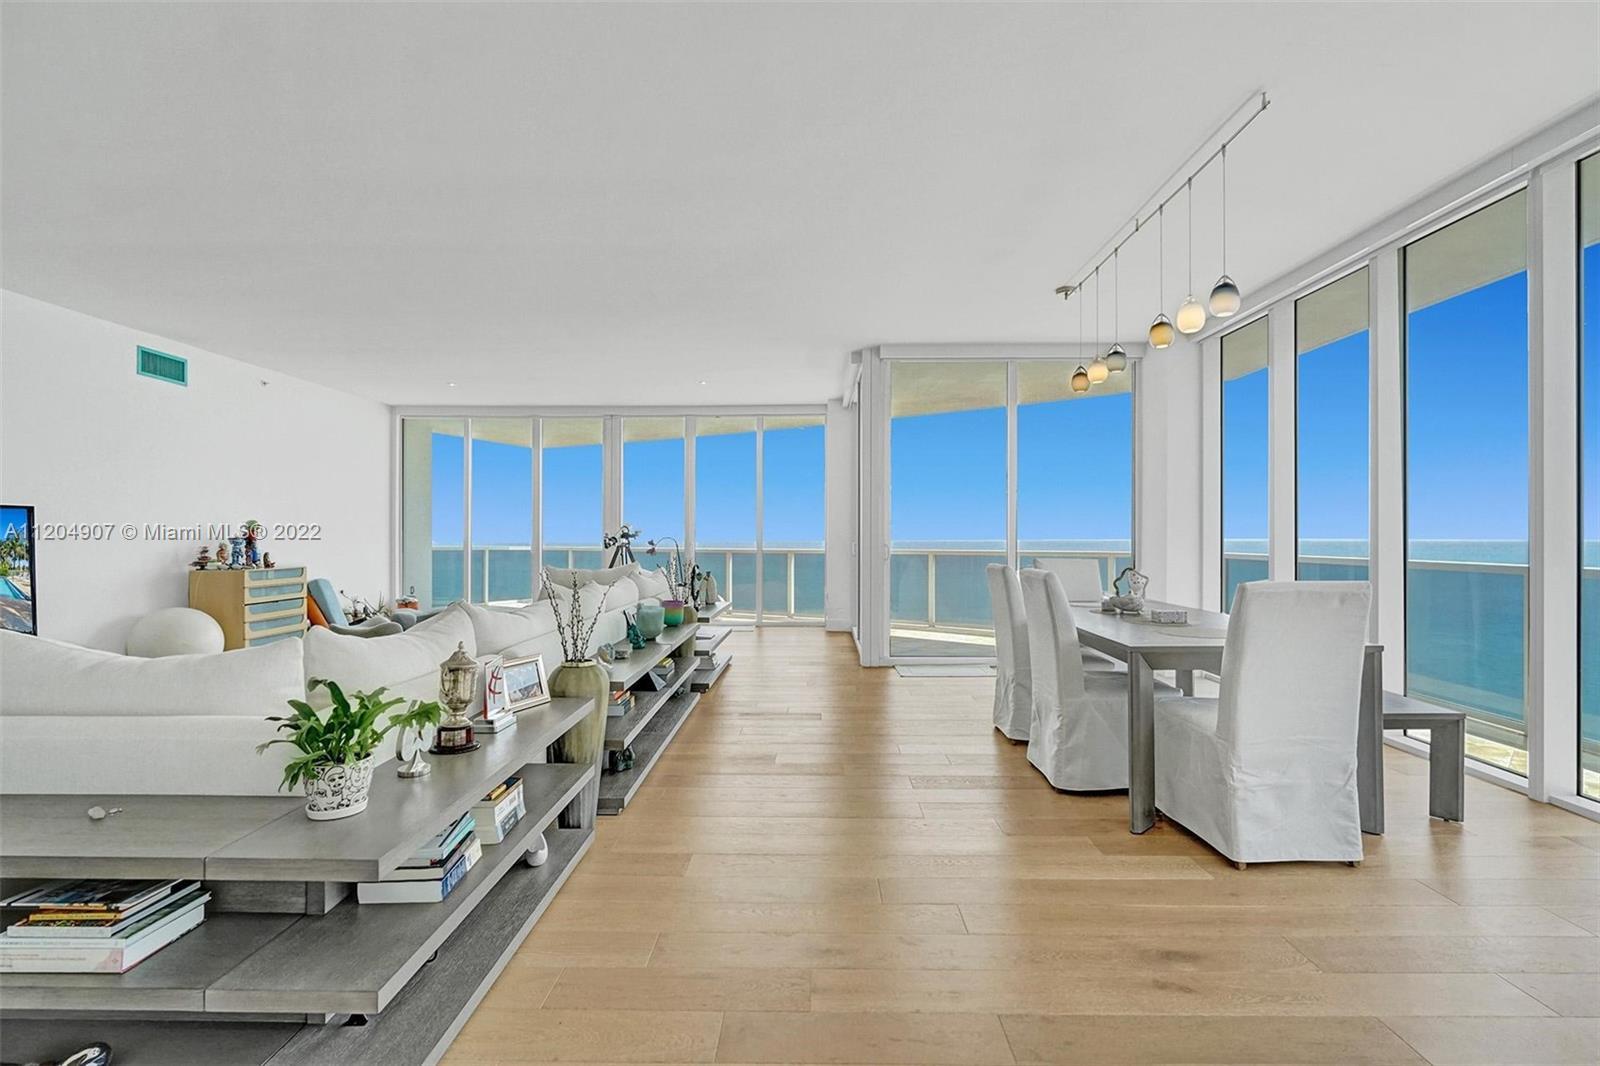 Magnificent residence  at the Bellini, the crown jewel of Bal Harbour. With direct ocean views as yo